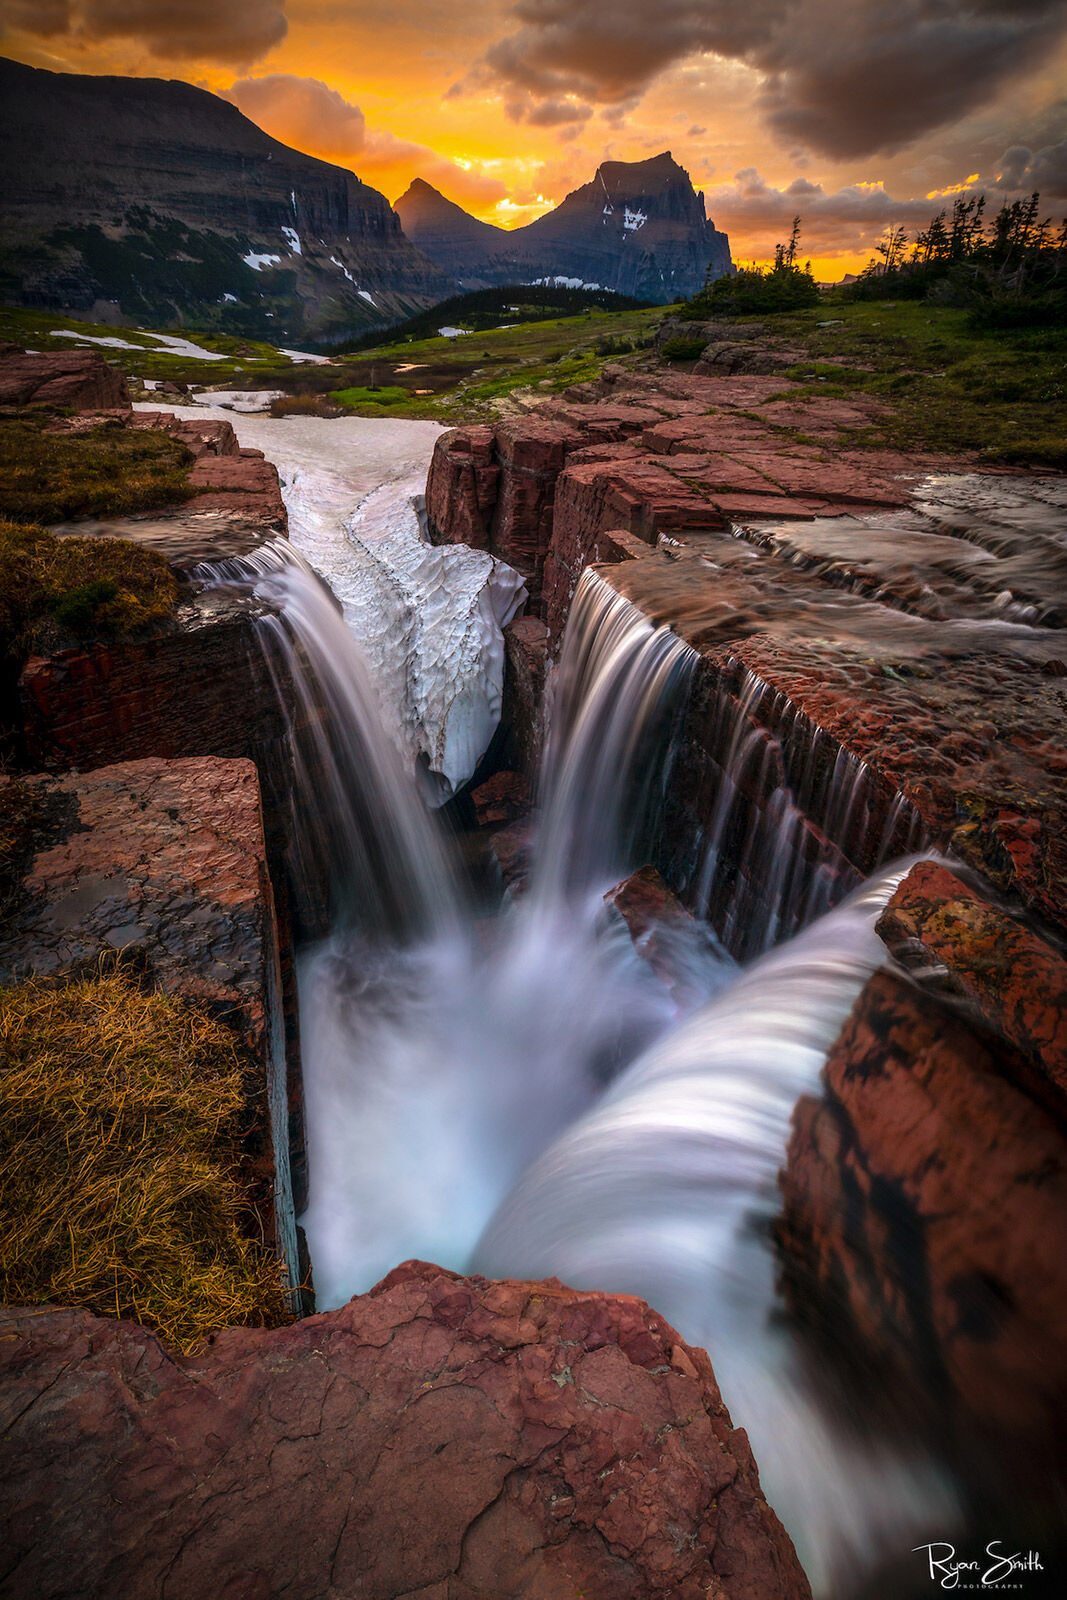 Triple Falls within Glacier National Park offers a serene view of majestic mountain Peaks, Flowers, and Water. Perfect serenity...